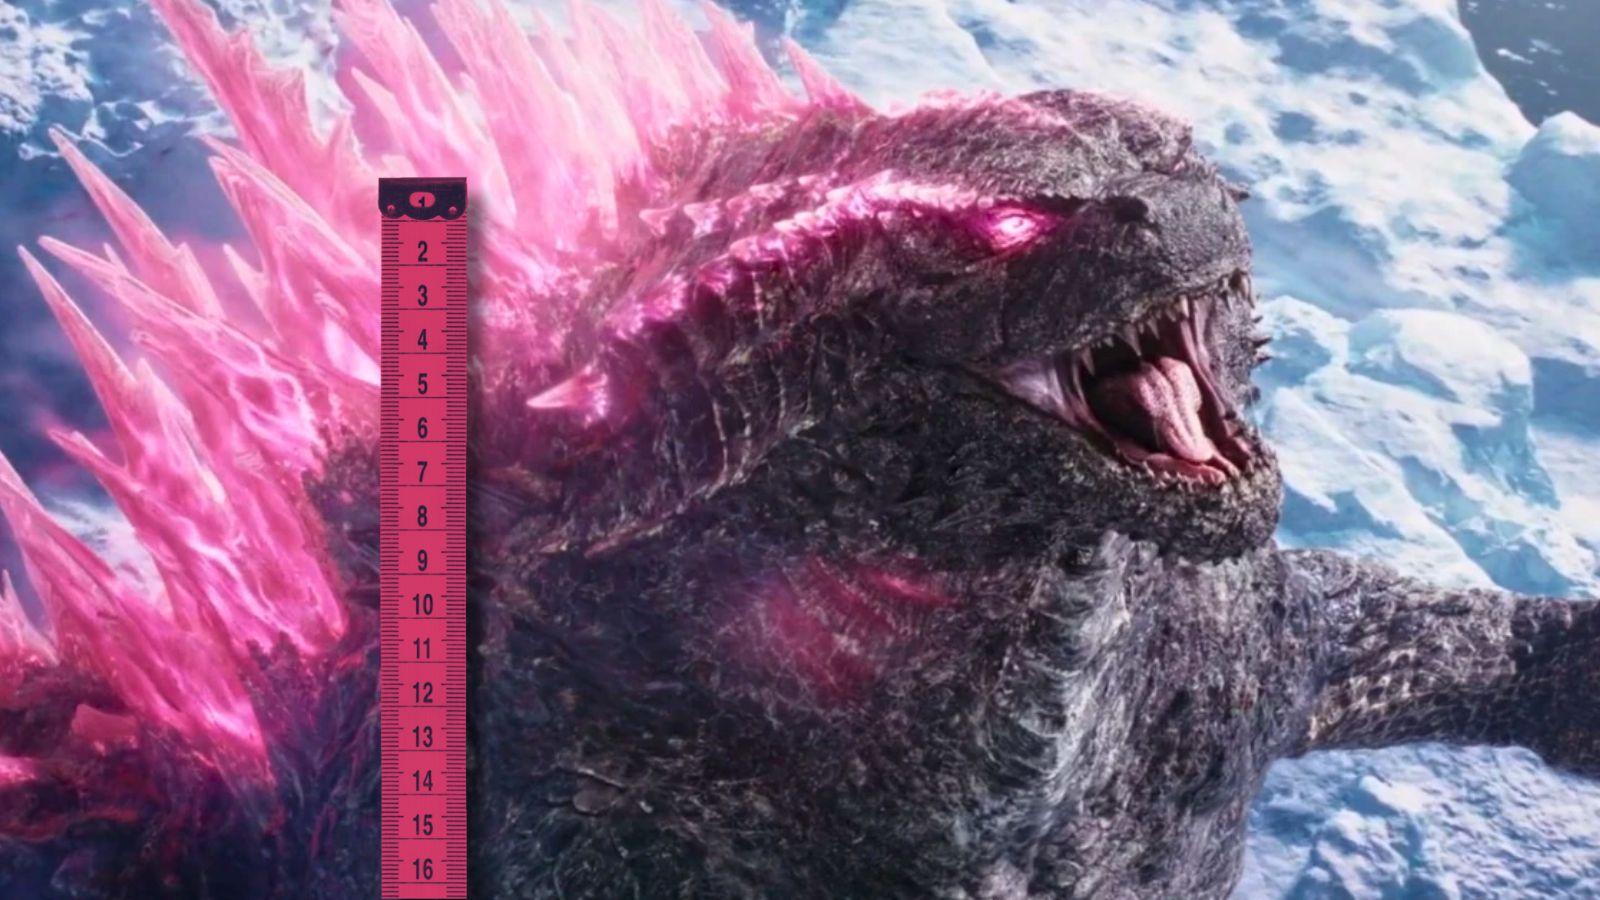 Godzilla roaring at the sky while standing next to a pink measuring tape